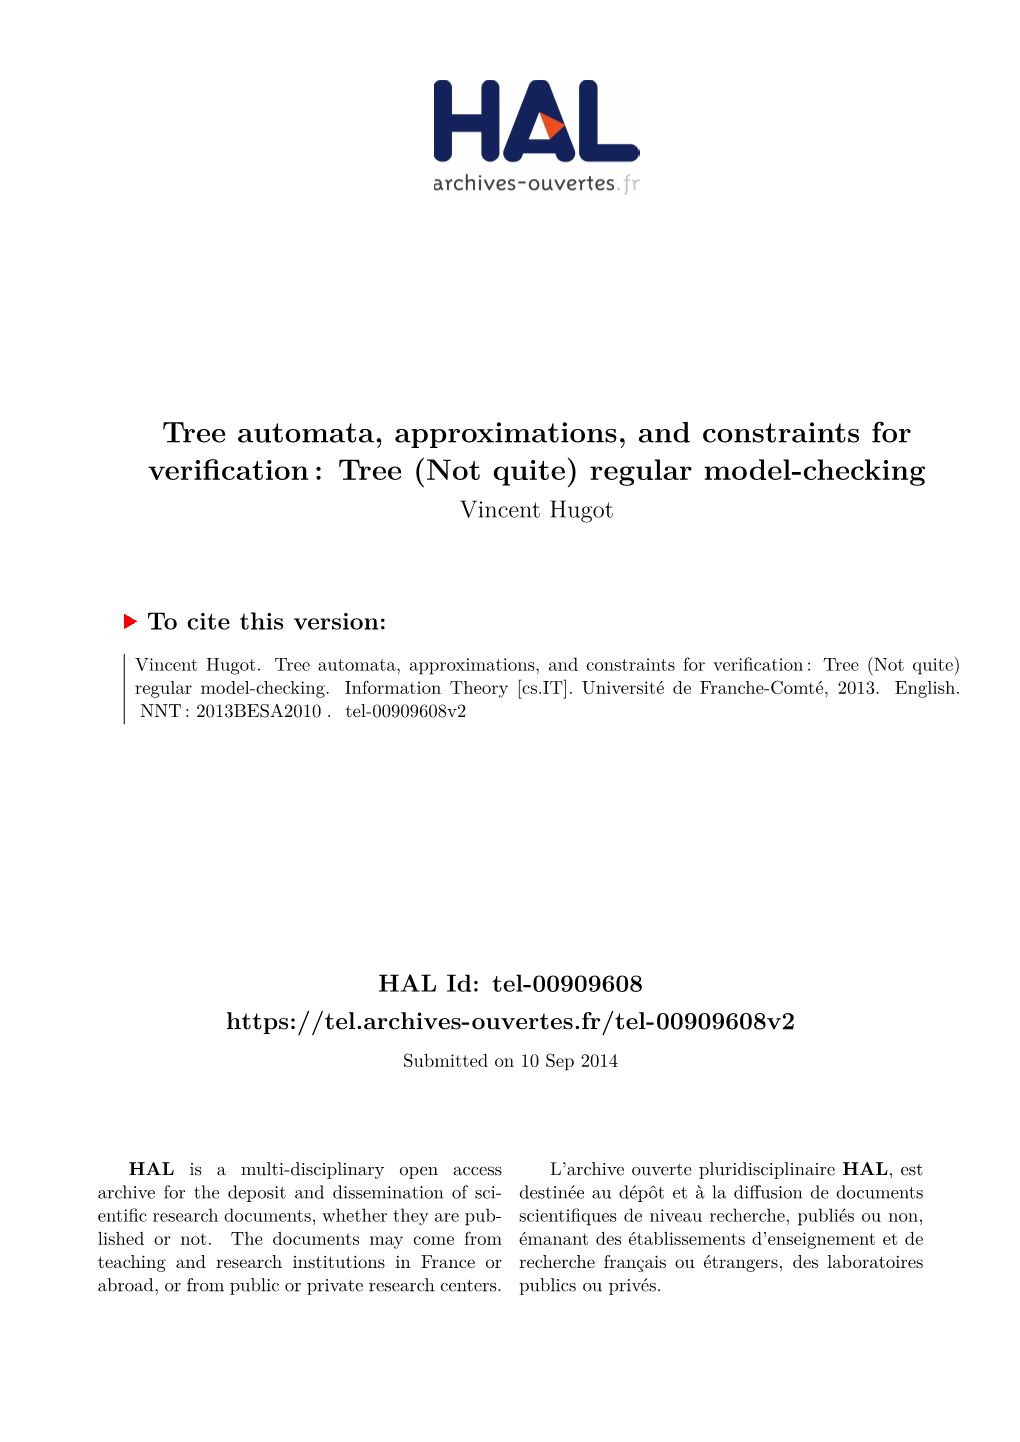 Tree Automata, Approximations, and Constraints for Verification : Tree (Not Quite) Regular Model-Checking Vincent Hugot